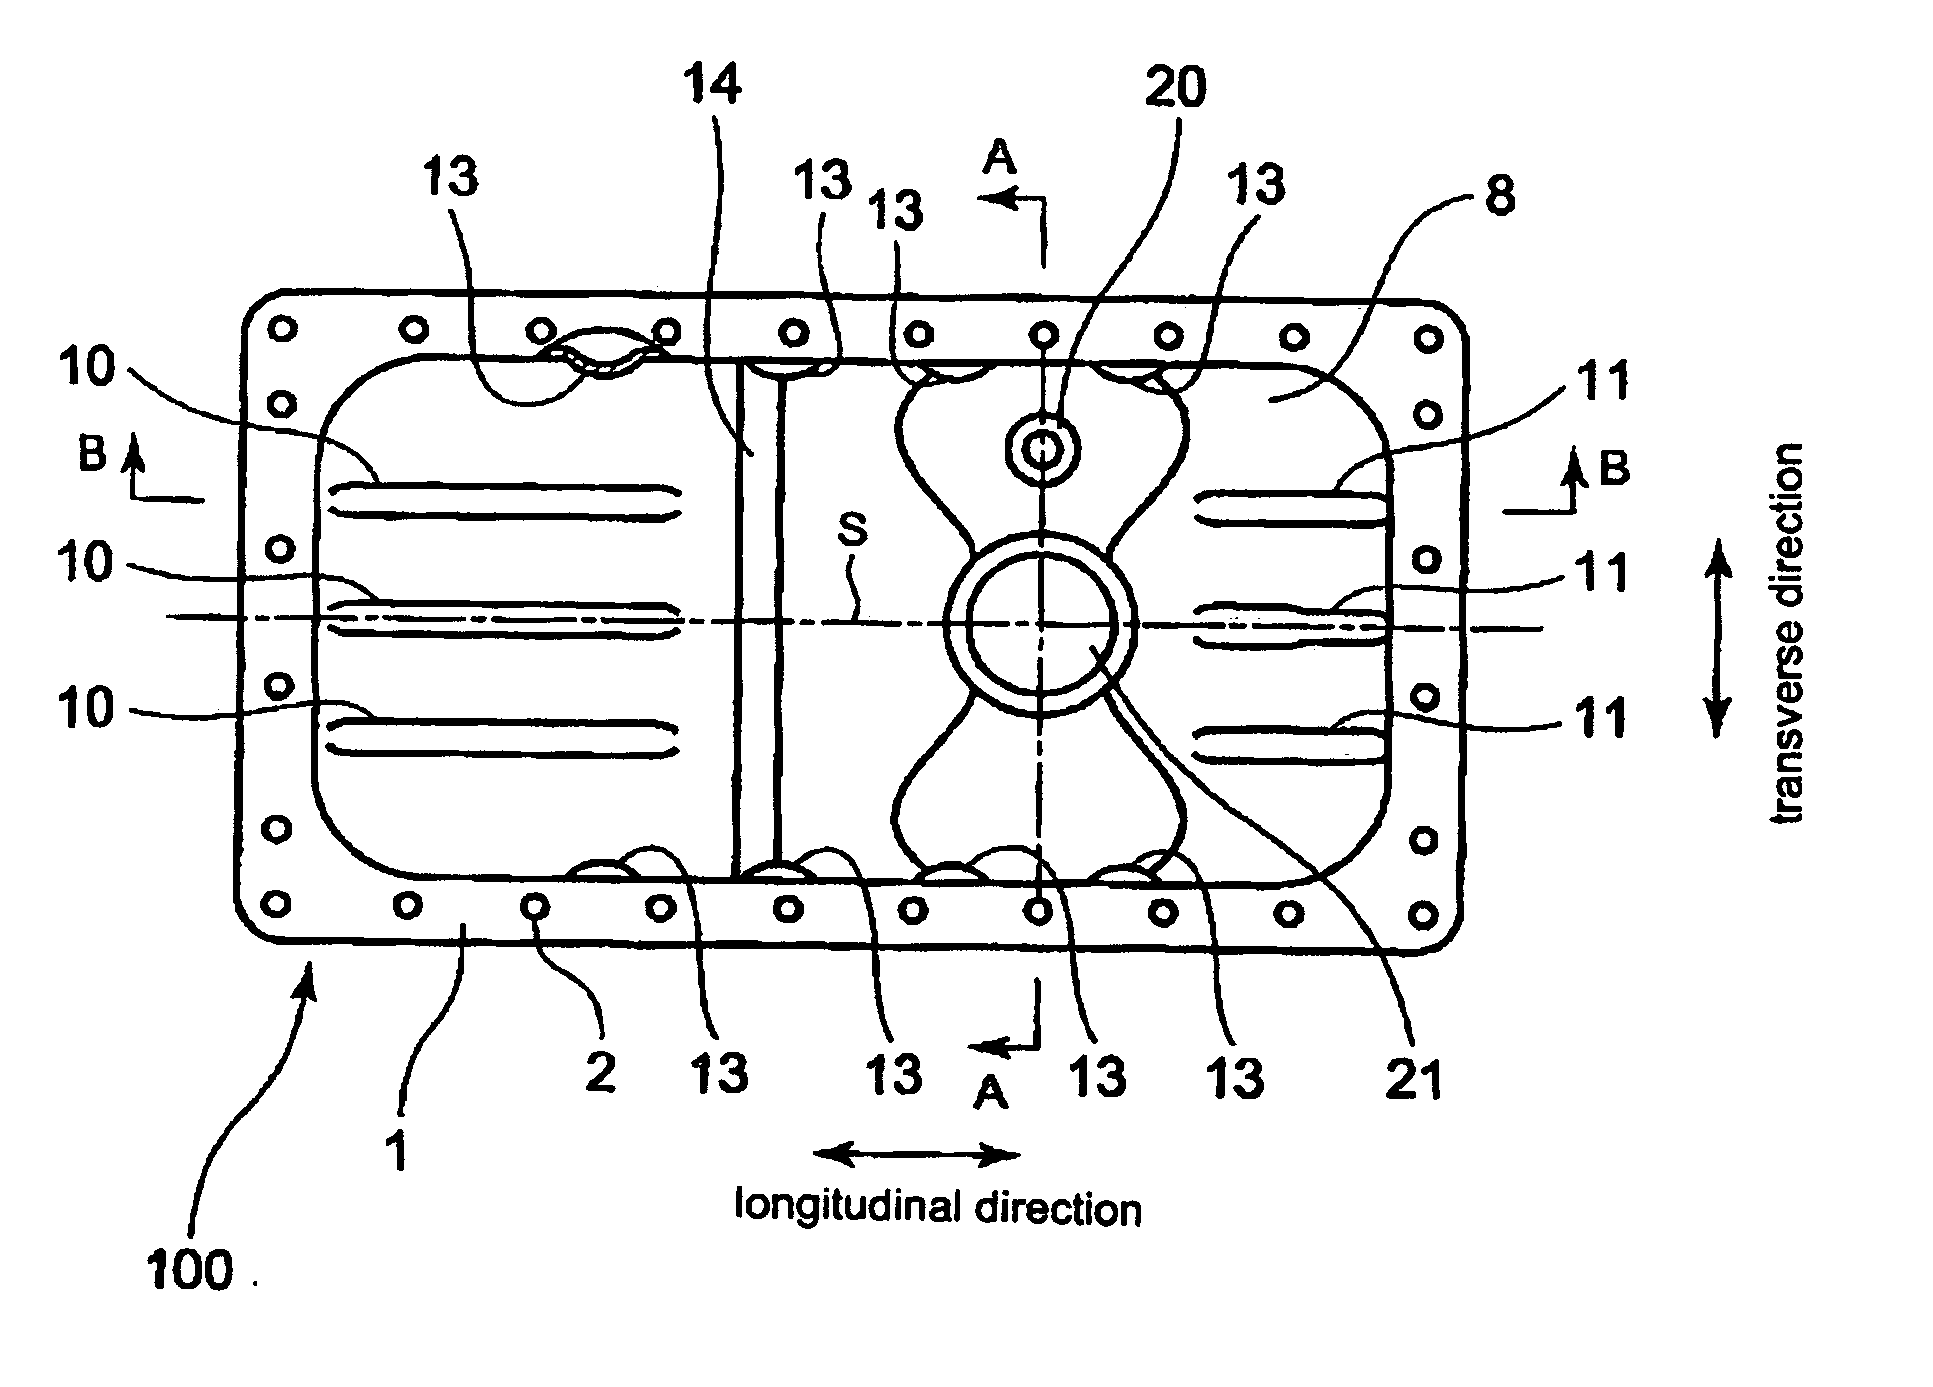 Oil pan structure and an engine therewith